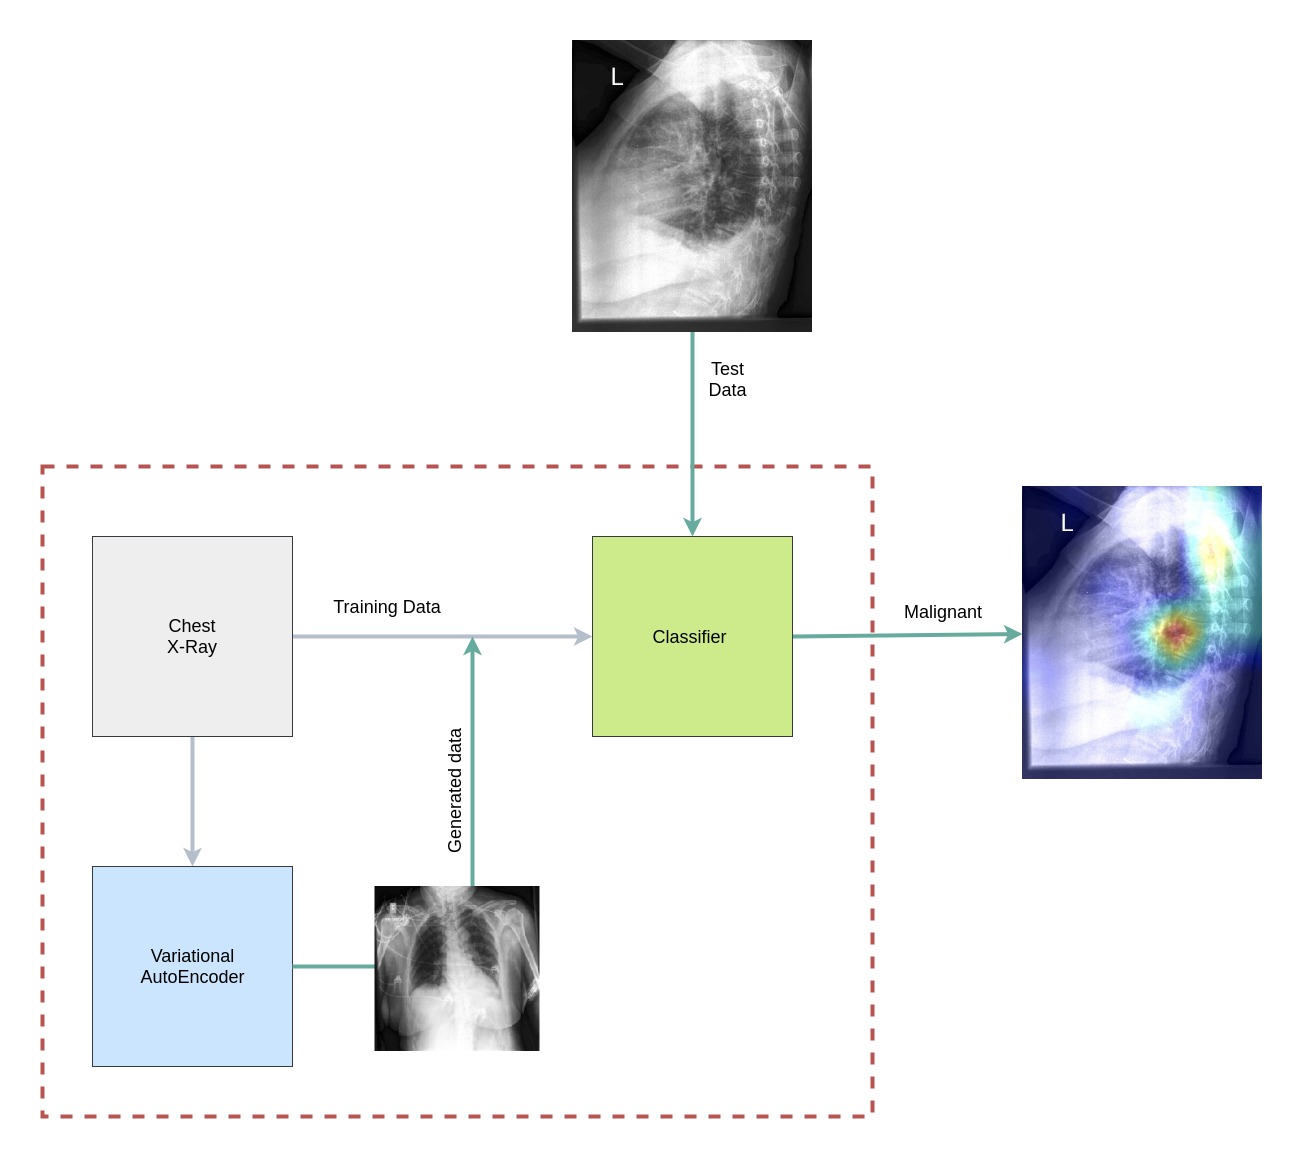 lung cancer prediction using machine learning research paper